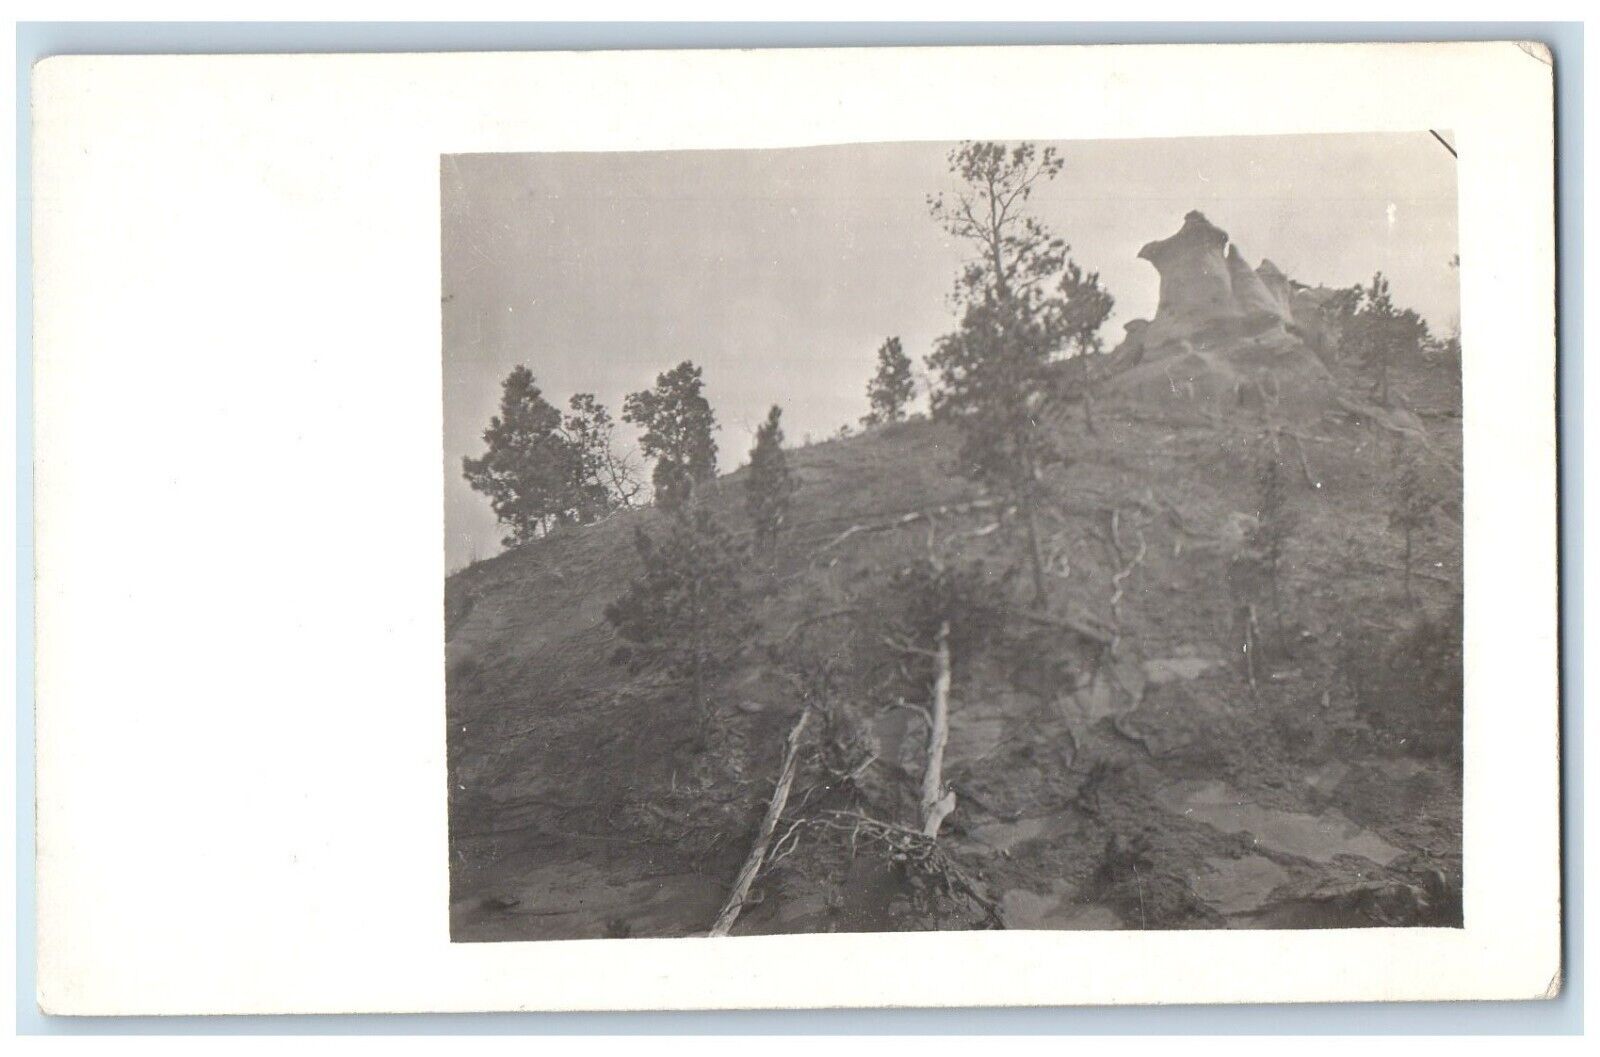 1914 View Of Hills Rocks Of Old Montana Posted Antique RPPC Photo Postcard